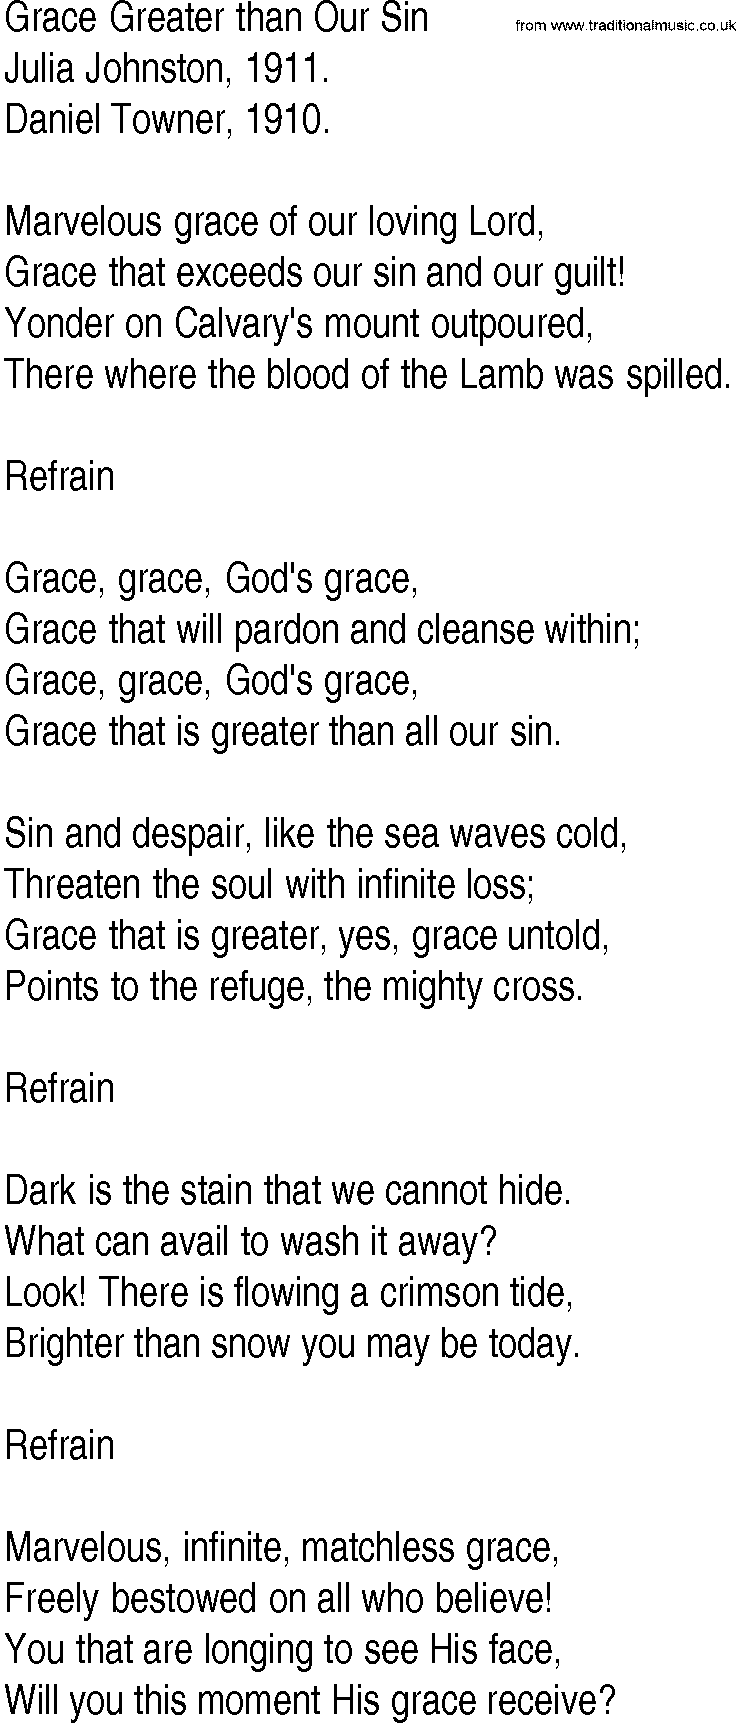 Hymn and Gospel Song: Grace Greater than Our Sin by Julia Johnston lyrics